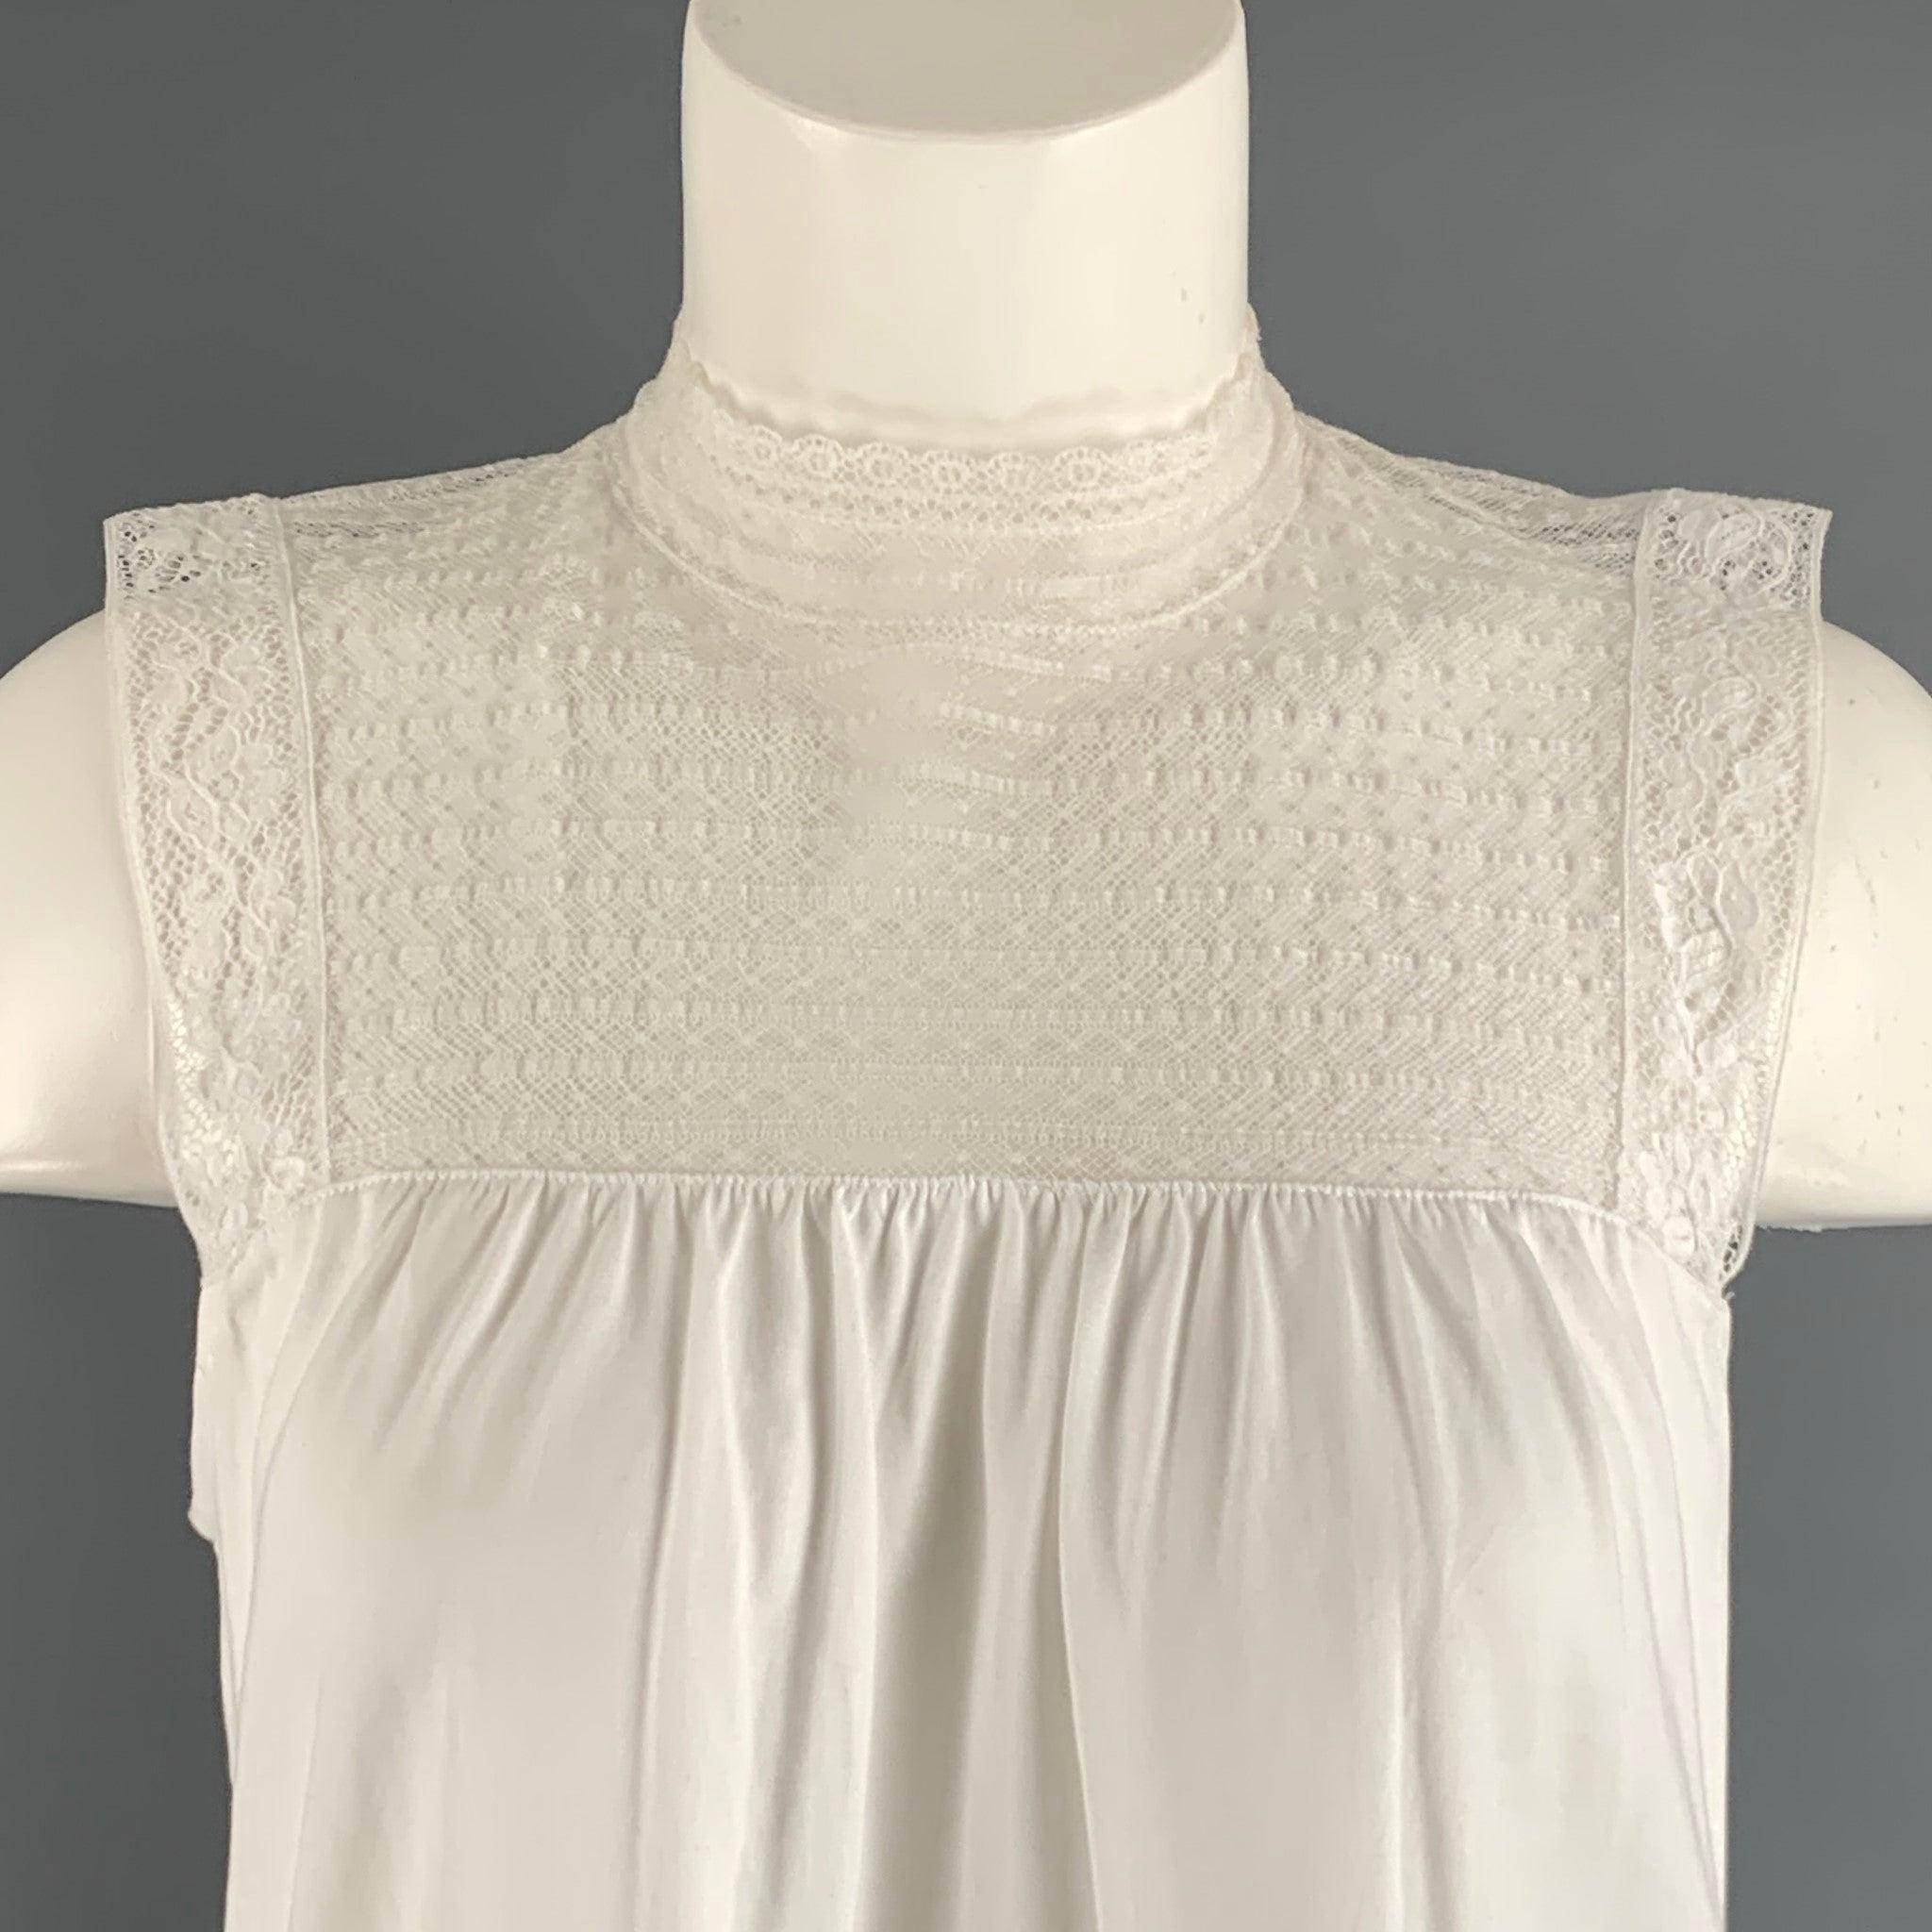 BURBERRY LONDON casual top comes in a white cotton jersey material featuring a lace panel.Good Pre-Owned Condition. Moderate Marks. 

Marked:   M 

Measurements: 
 
Shoulder: 14 inches Chest: 38 inches Length: 23.5 inches 
  
  
 
Reference: